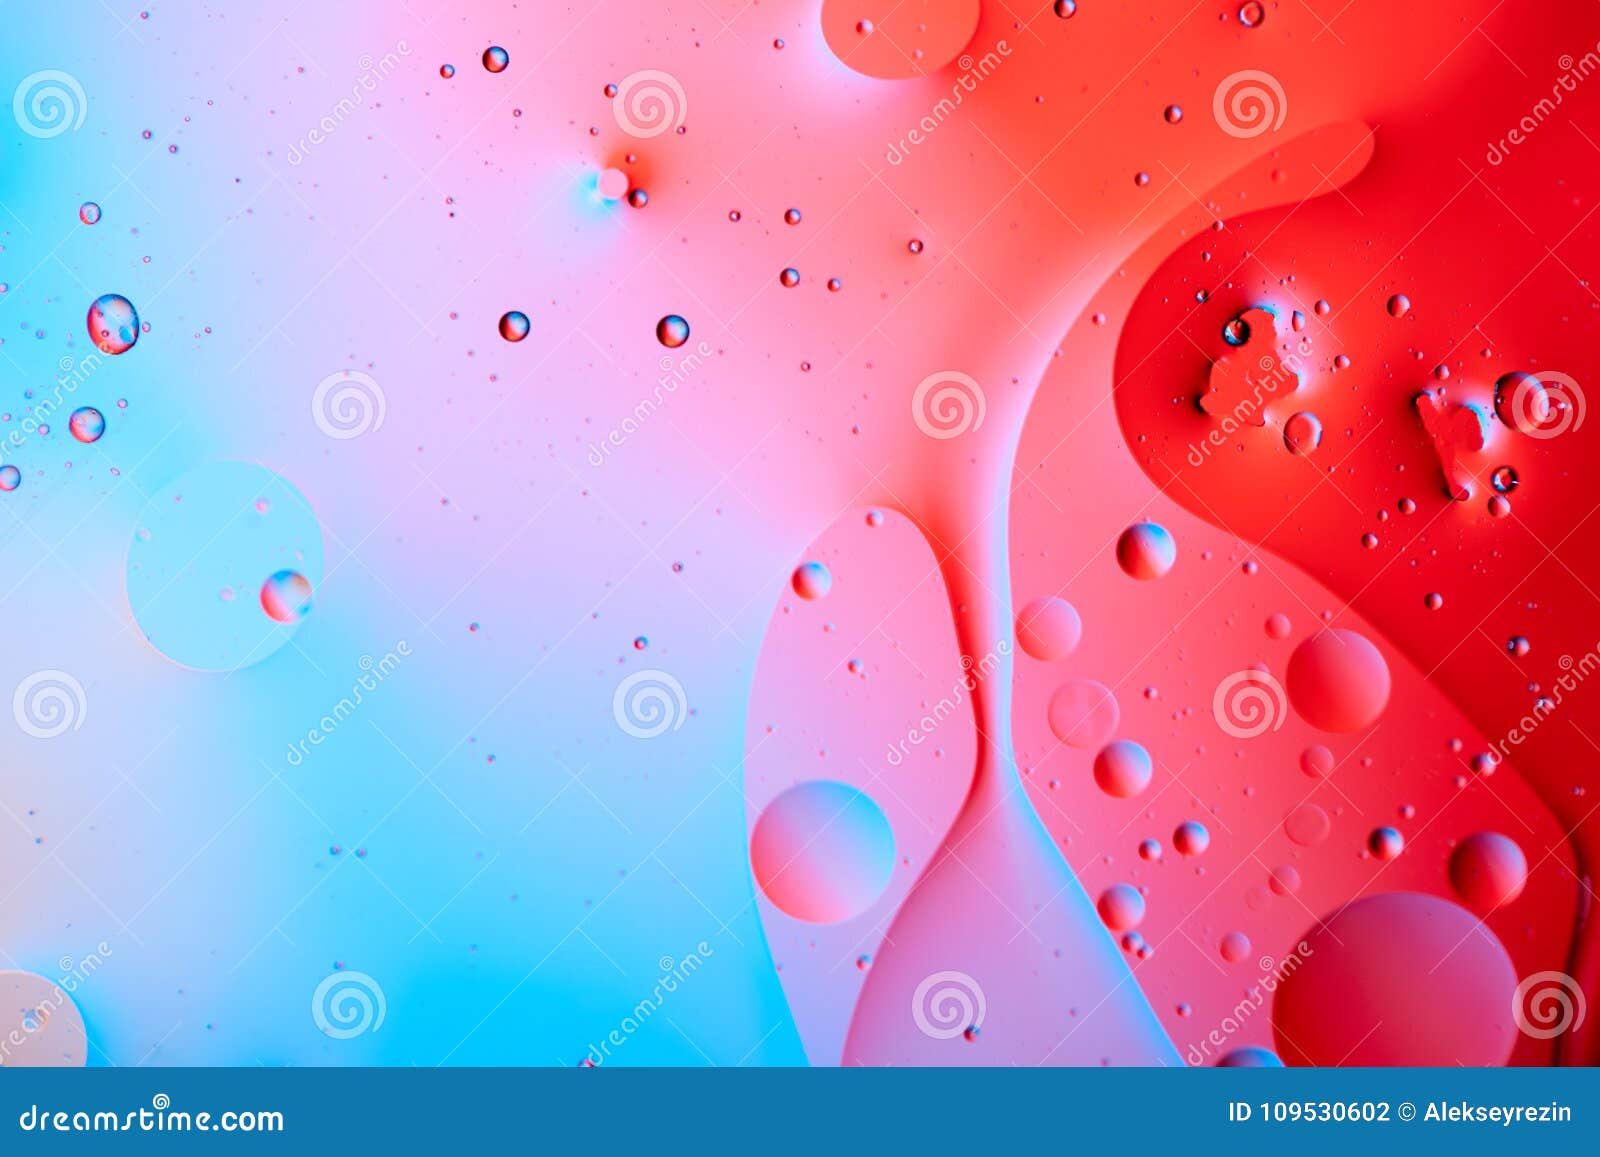 mix colorpink blue white 2560x1440  Background wallpaper for photoshop Color  mixing Pink ombre wallpaper